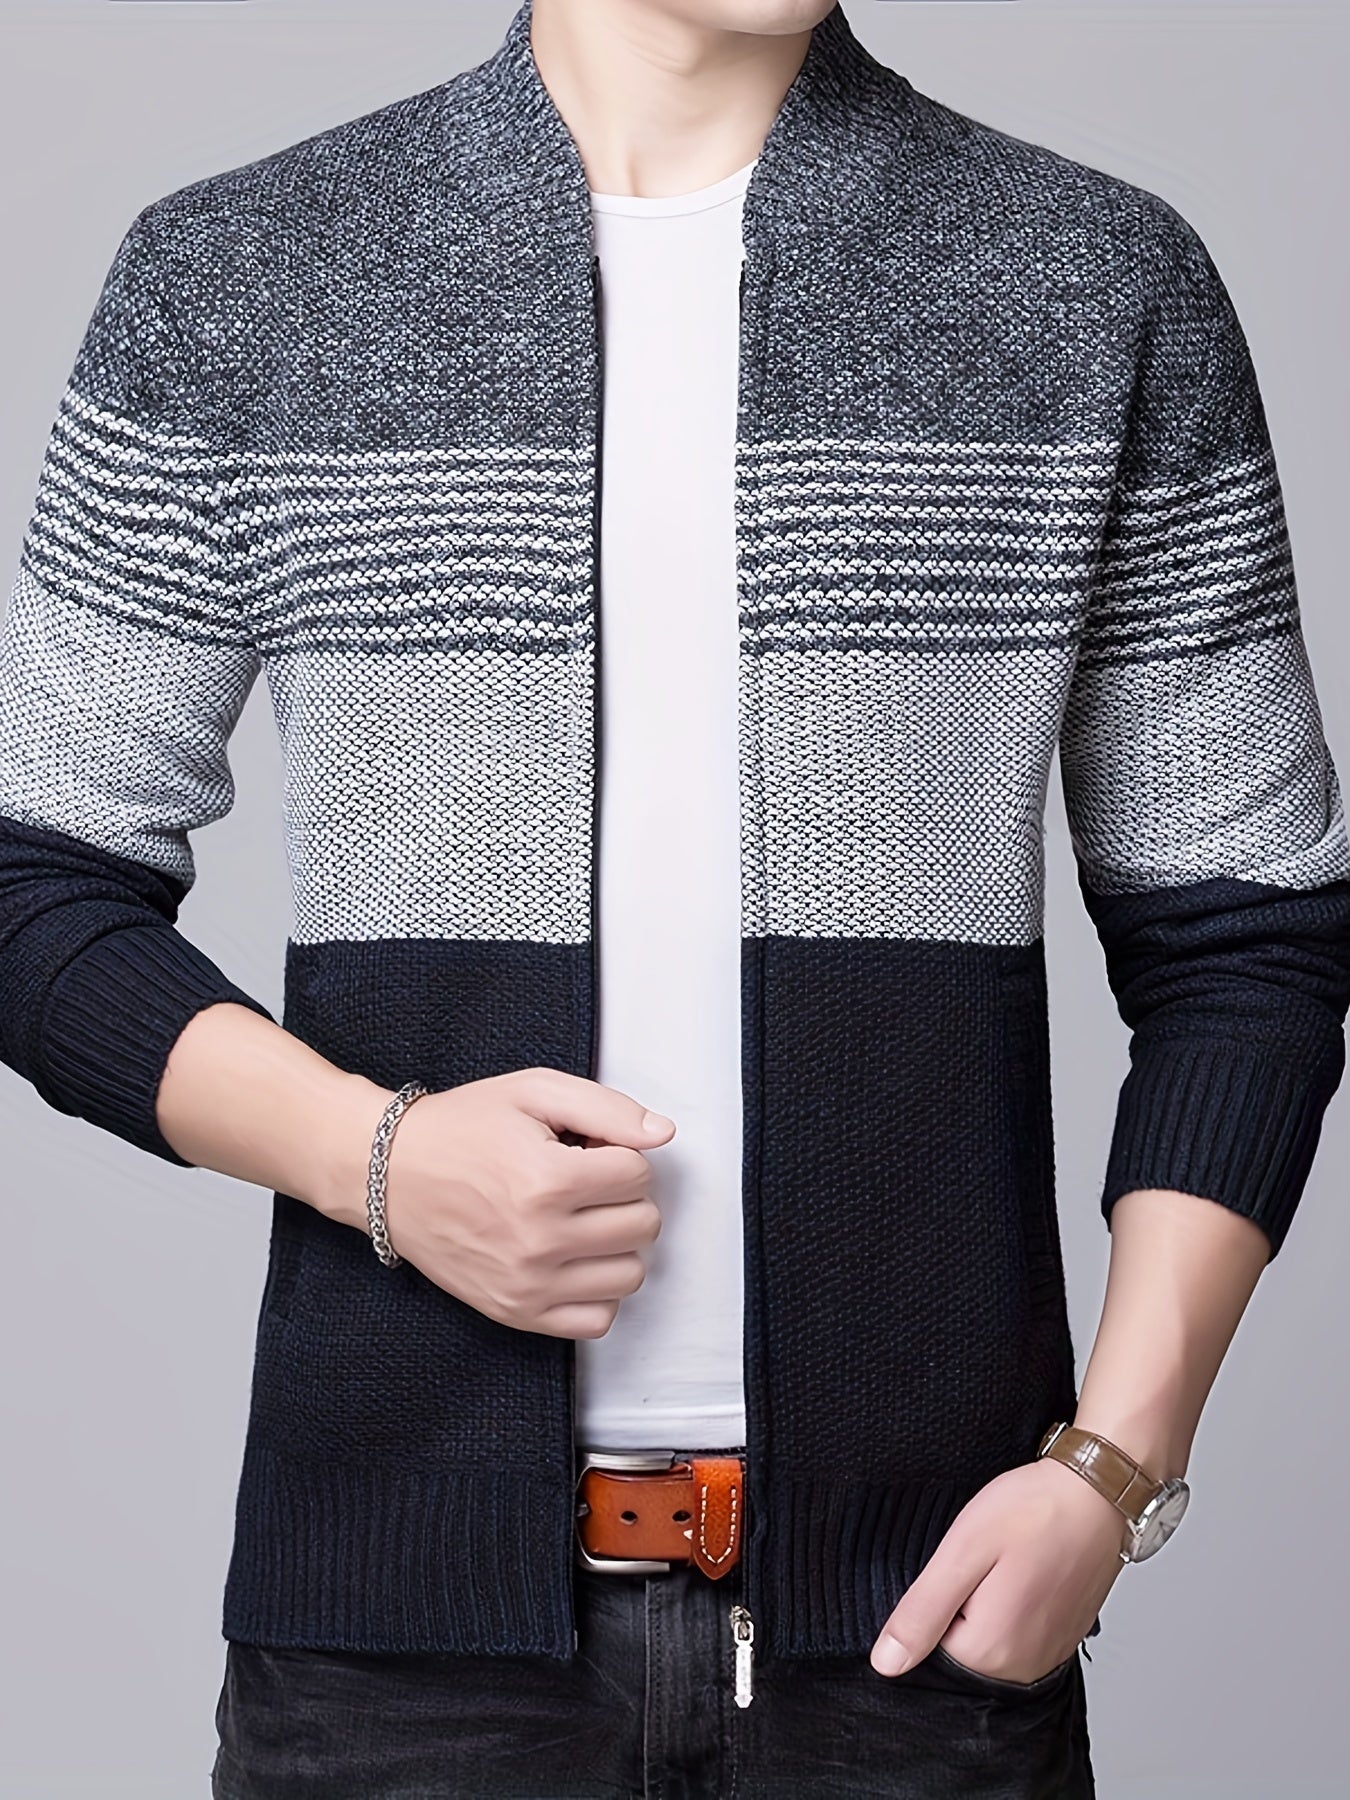 Color Block Warm Zip Up Jacket Sweater, Men's Casual Stand Collar Mid Stretch Cardigan For Fall Winter